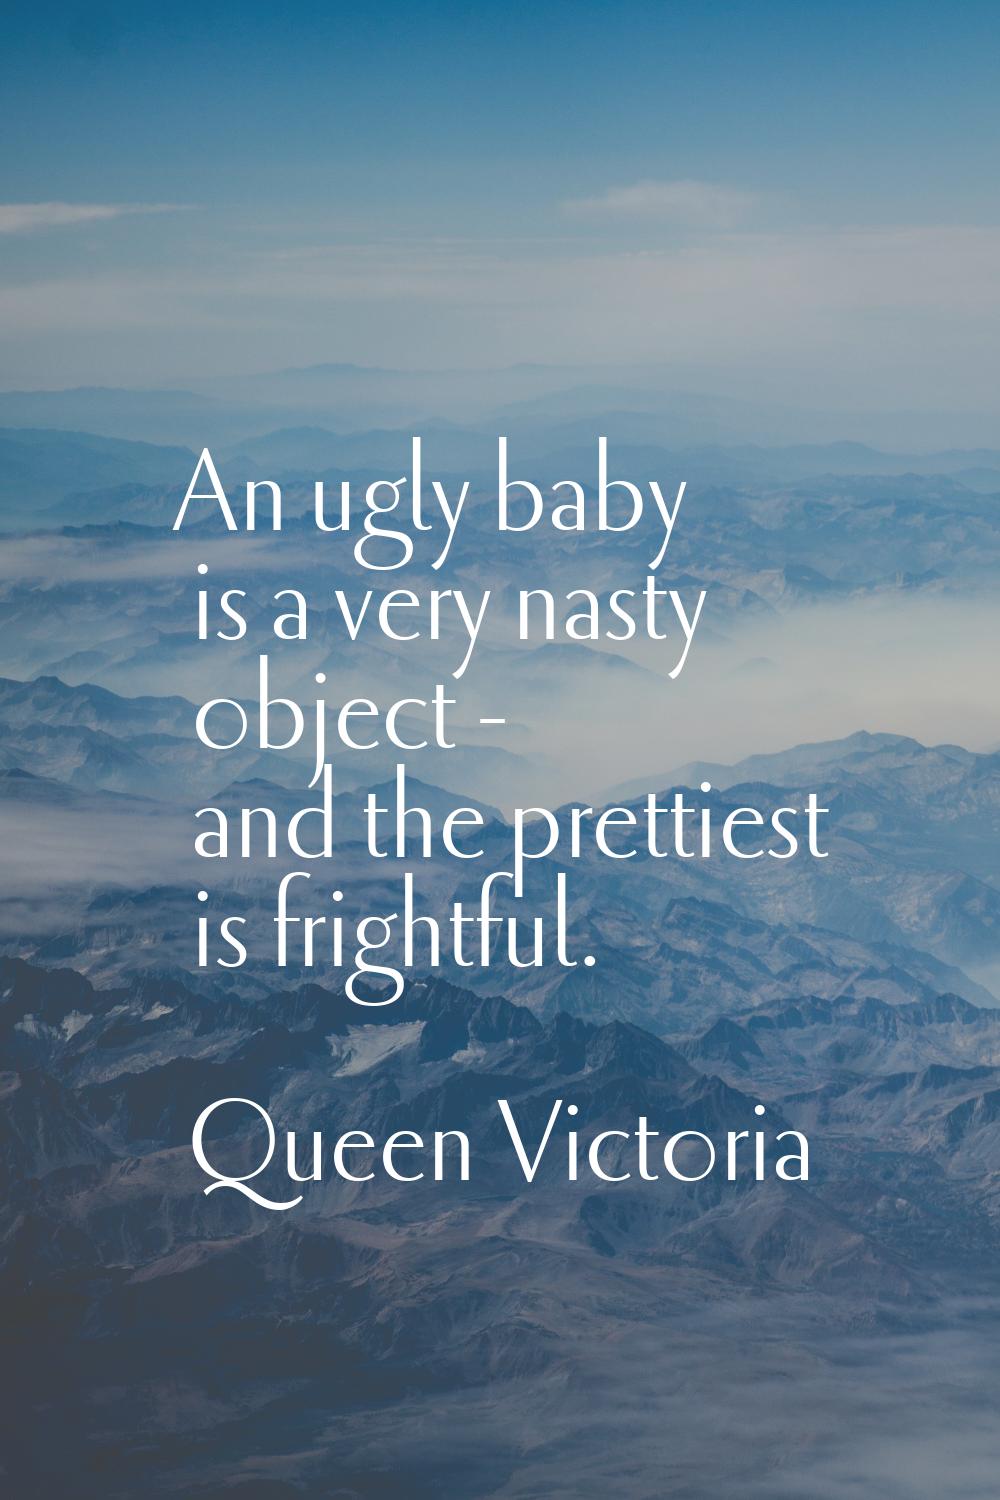 An ugly baby is a very nasty object - and the prettiest is frightful.